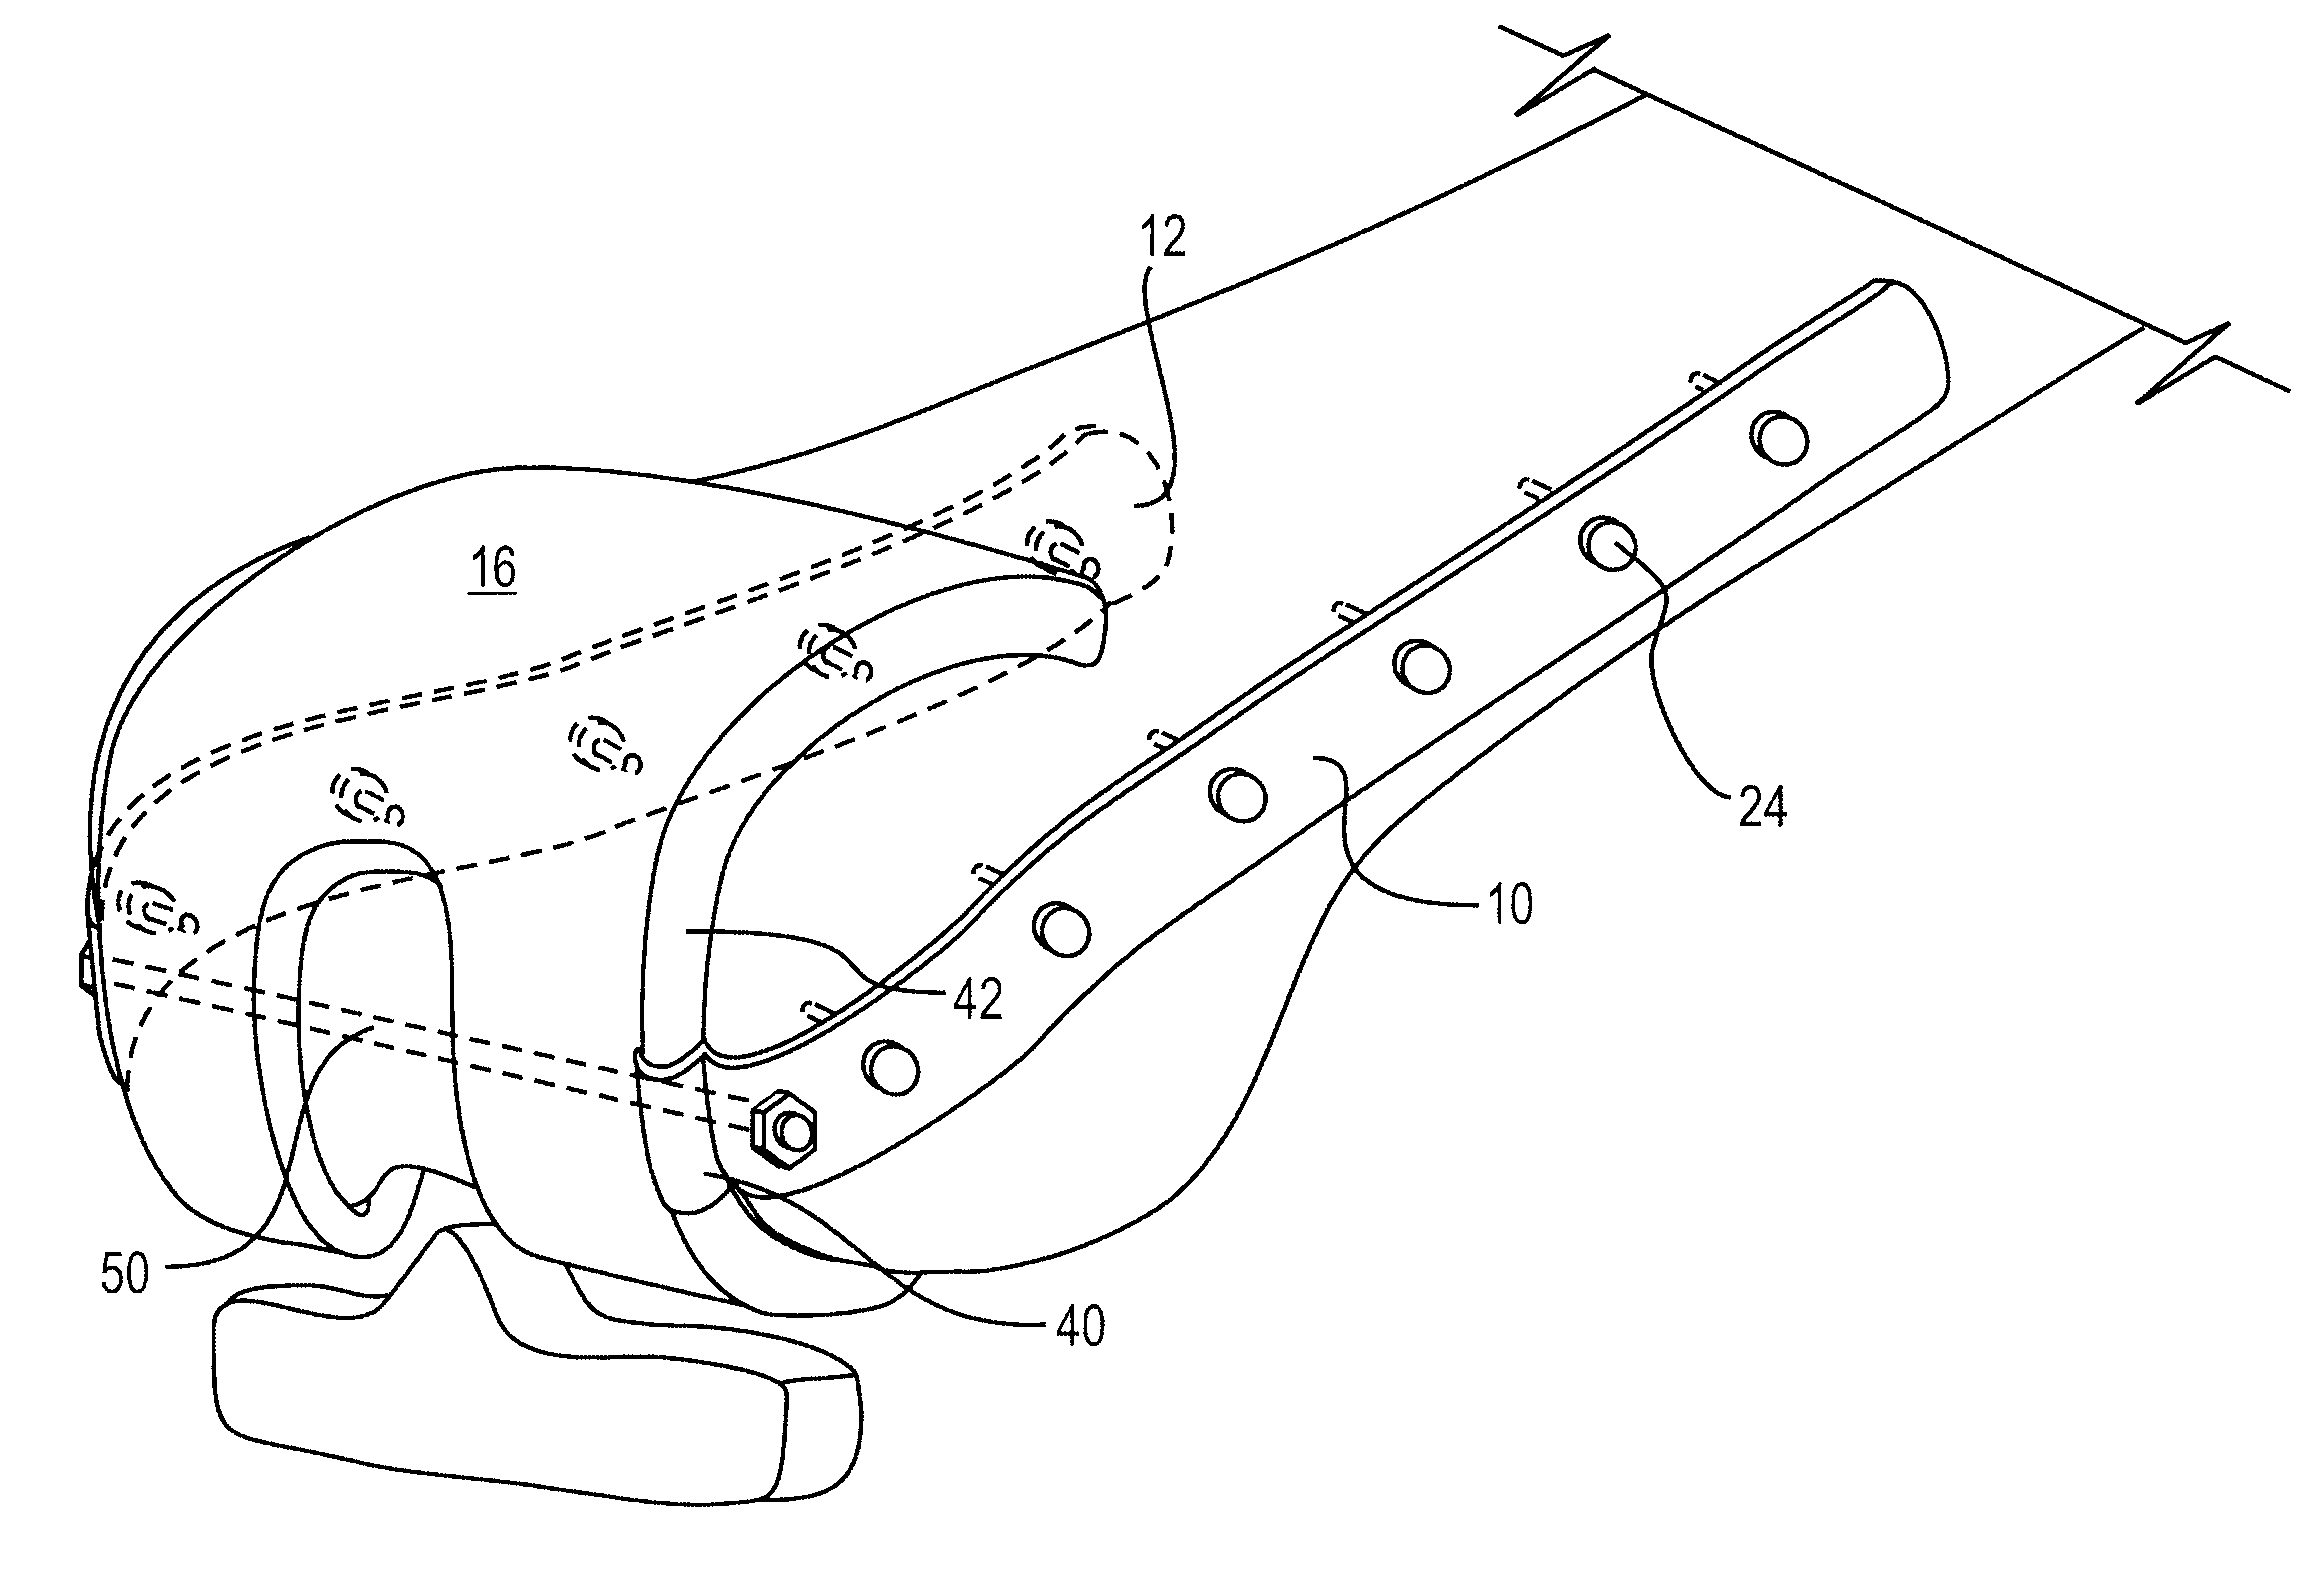 Method and apparatus for treating periprosthetic fractures of the distal femur